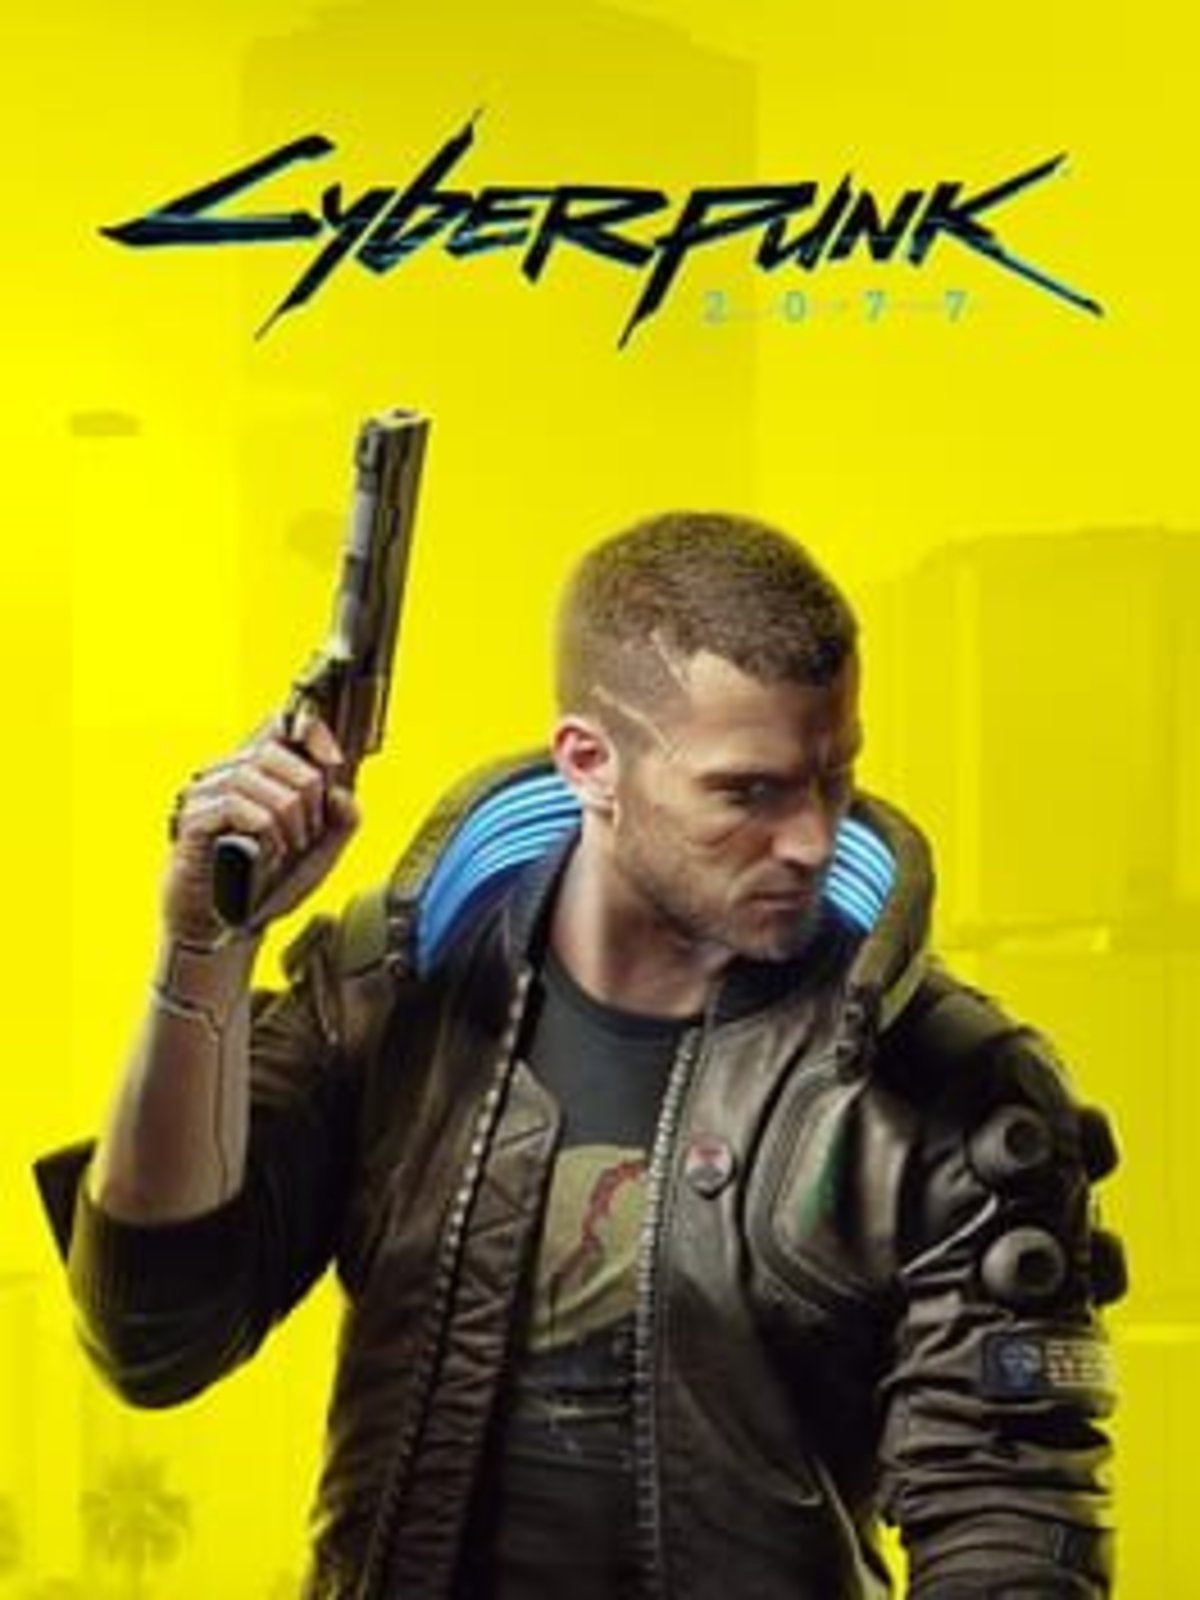 Cyberpunk 2077 was the best-selling game on the PlayStation Store after its return in June